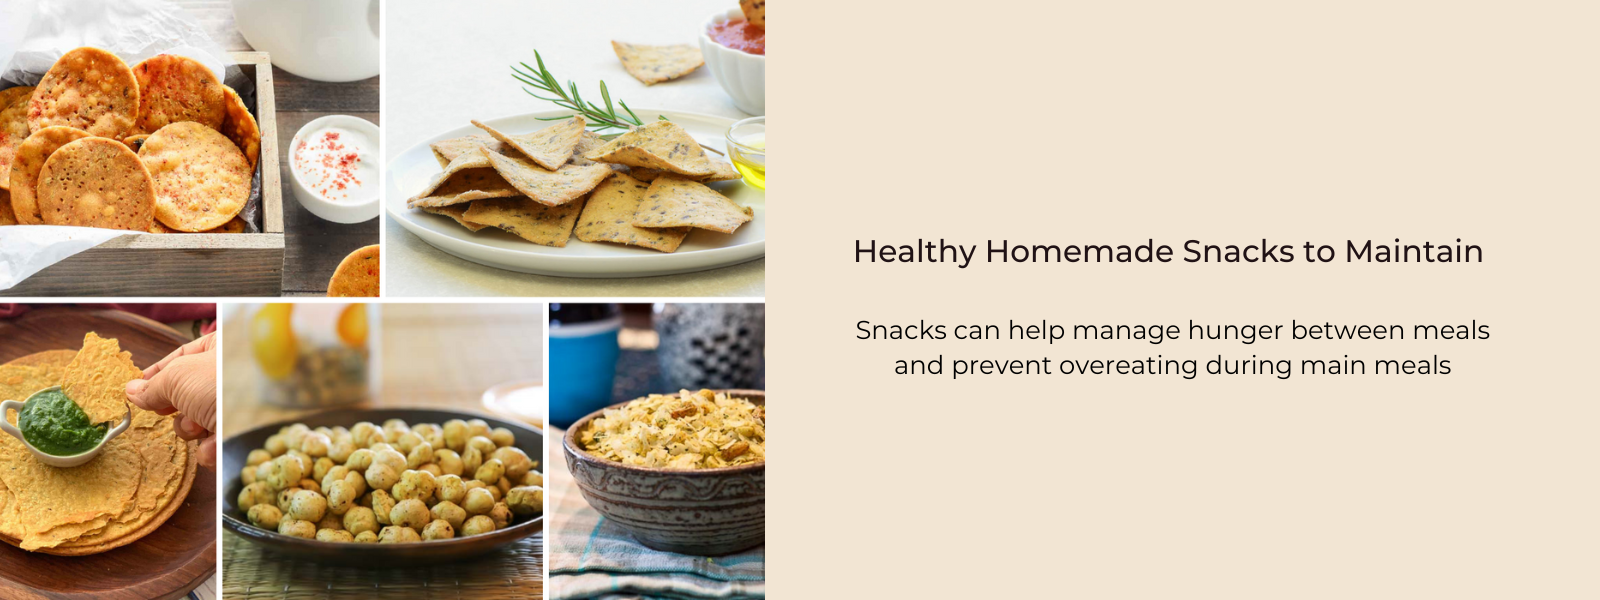 Easy healthy Homemade Snacks to Maintain Weight